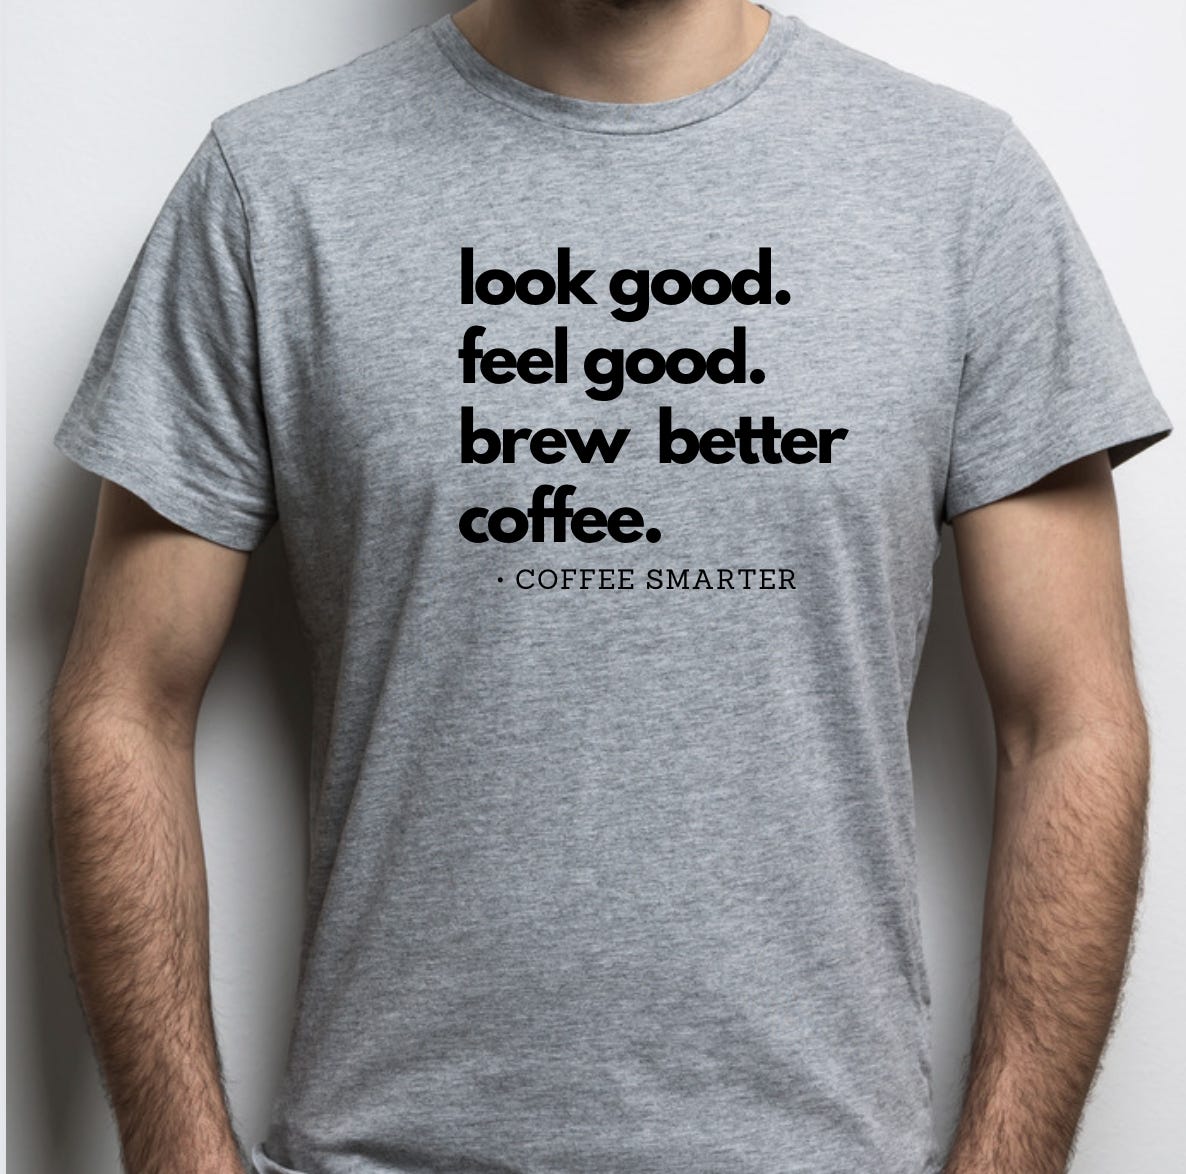 Slogan on a grey t-shirt in lowercase black font.